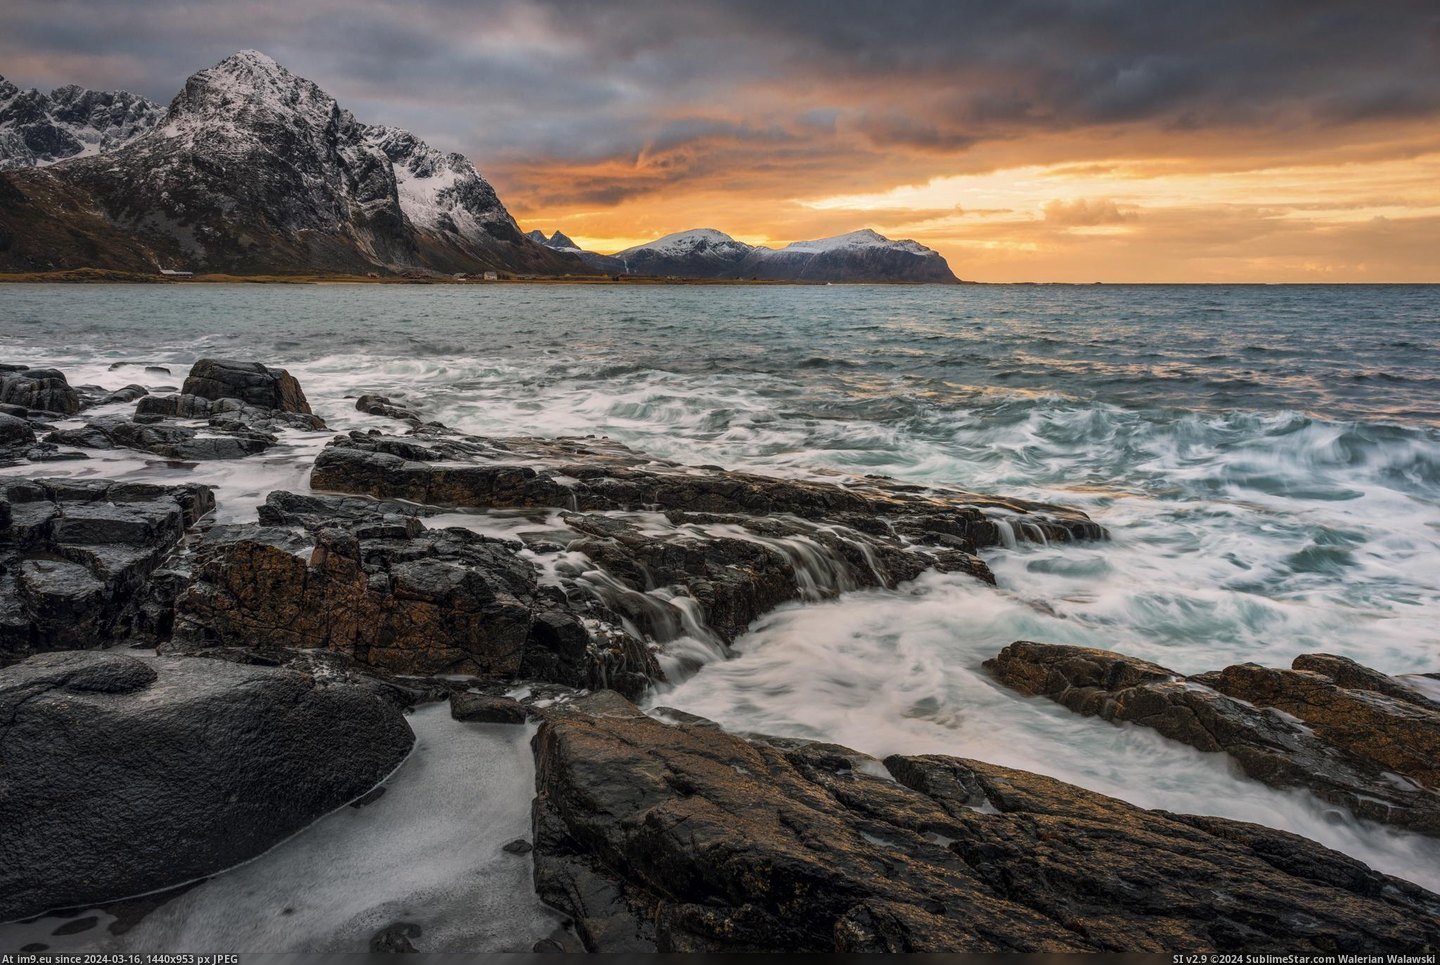 #Sunset #Winter #Wave #2048x1367 #Action #Norway [Earthporn]  A winter sunset with some of wave action near Ramberg, Norway [2048x1367] Pic. (Bild von album My r/EARTHPORN favs))